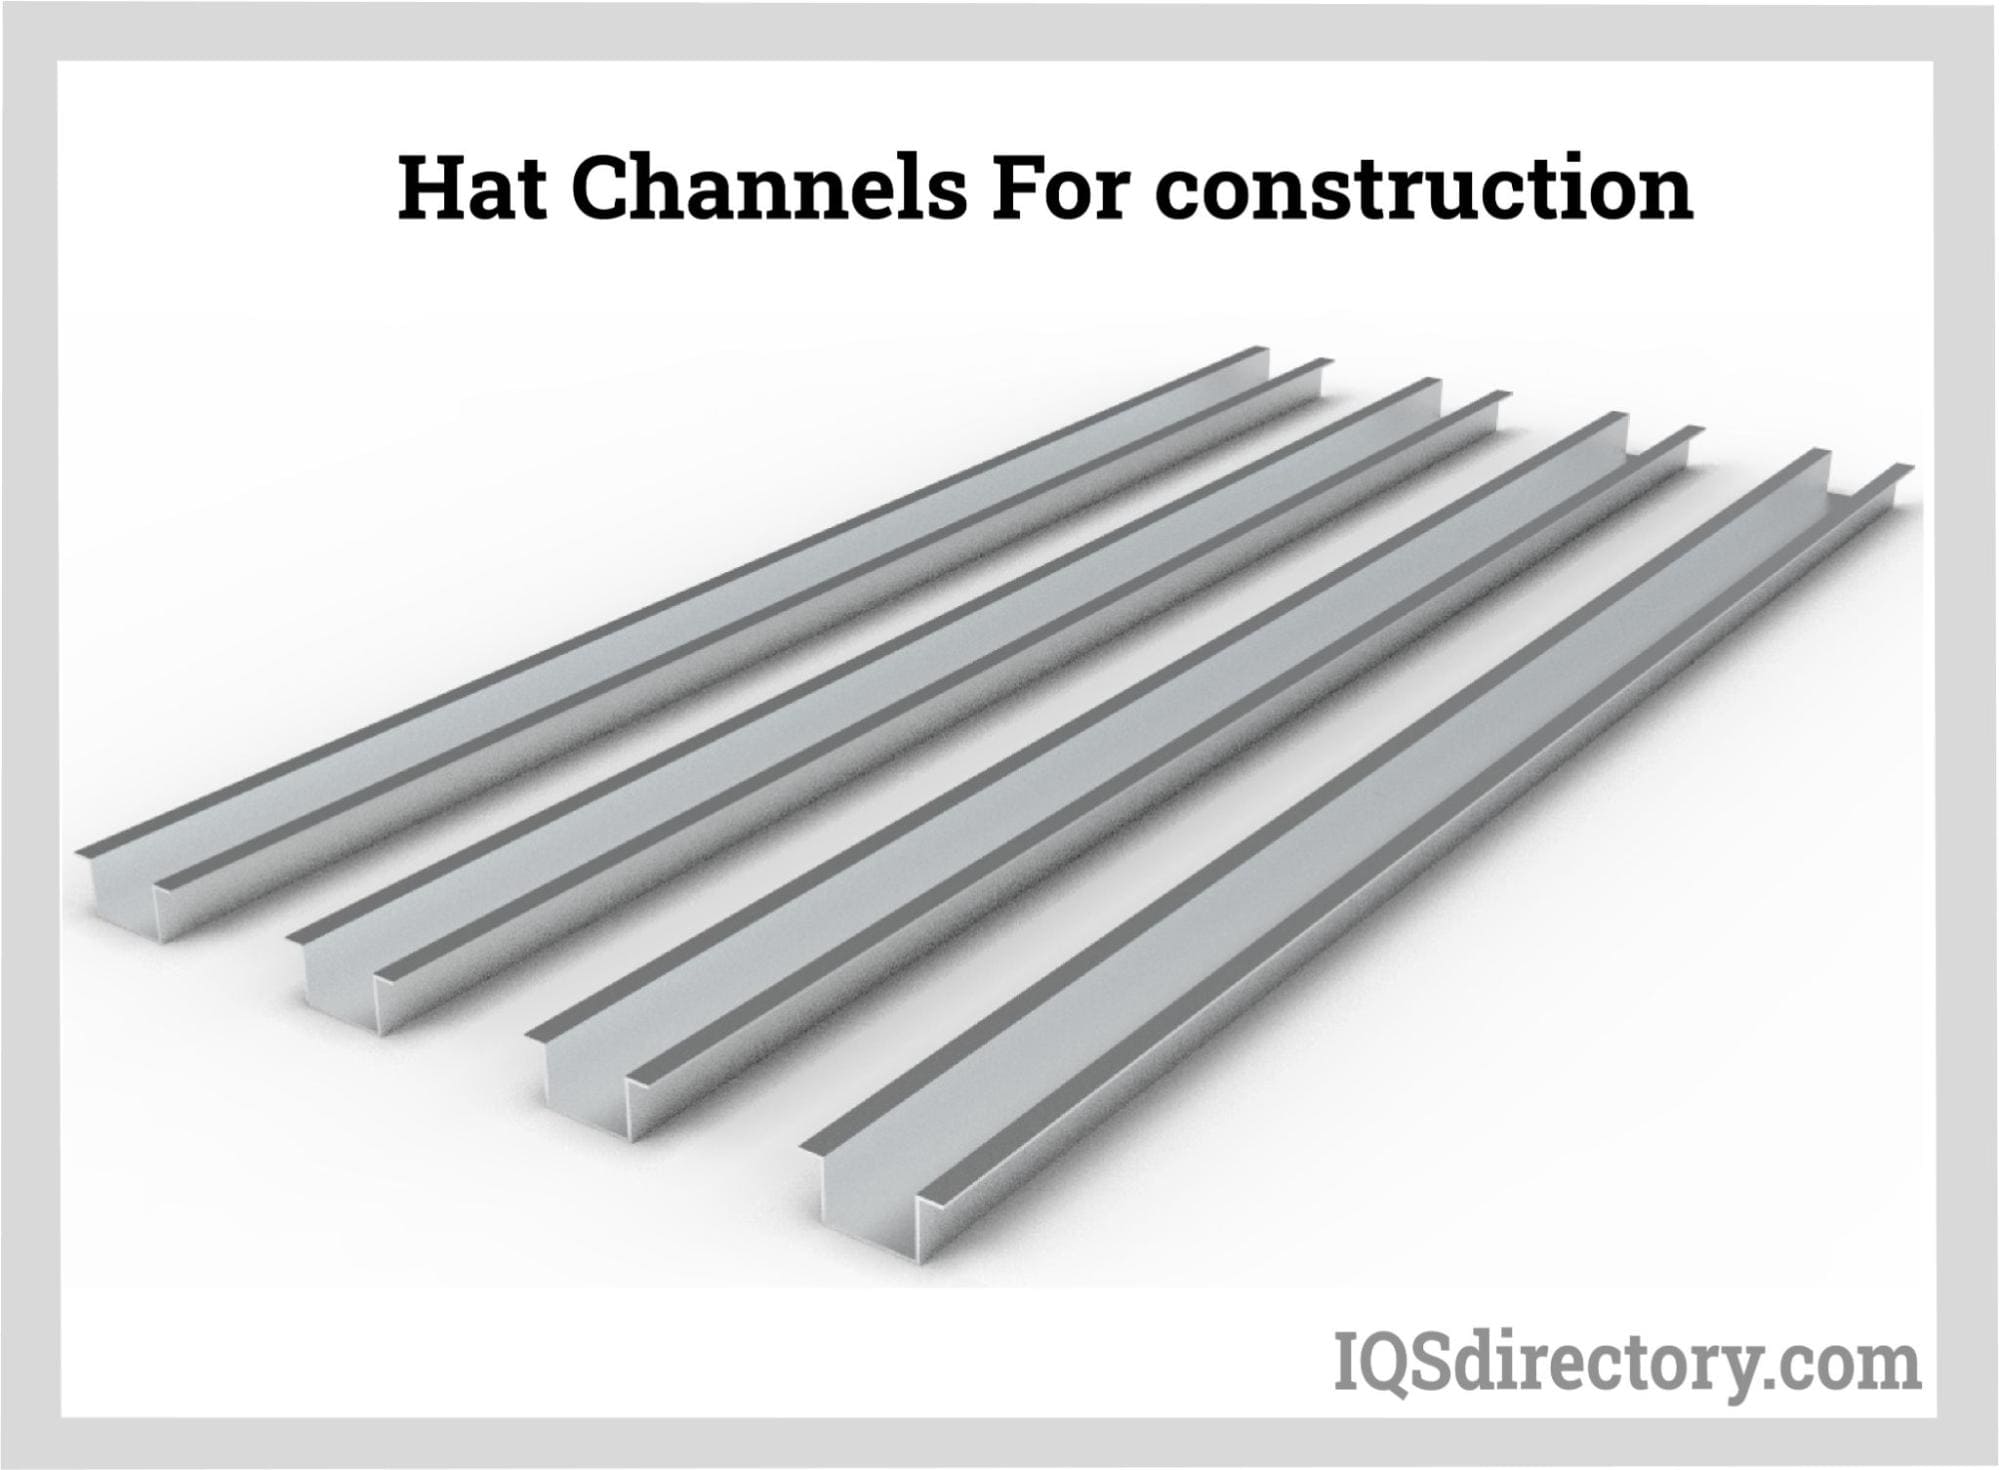 Hat Channels For Construction